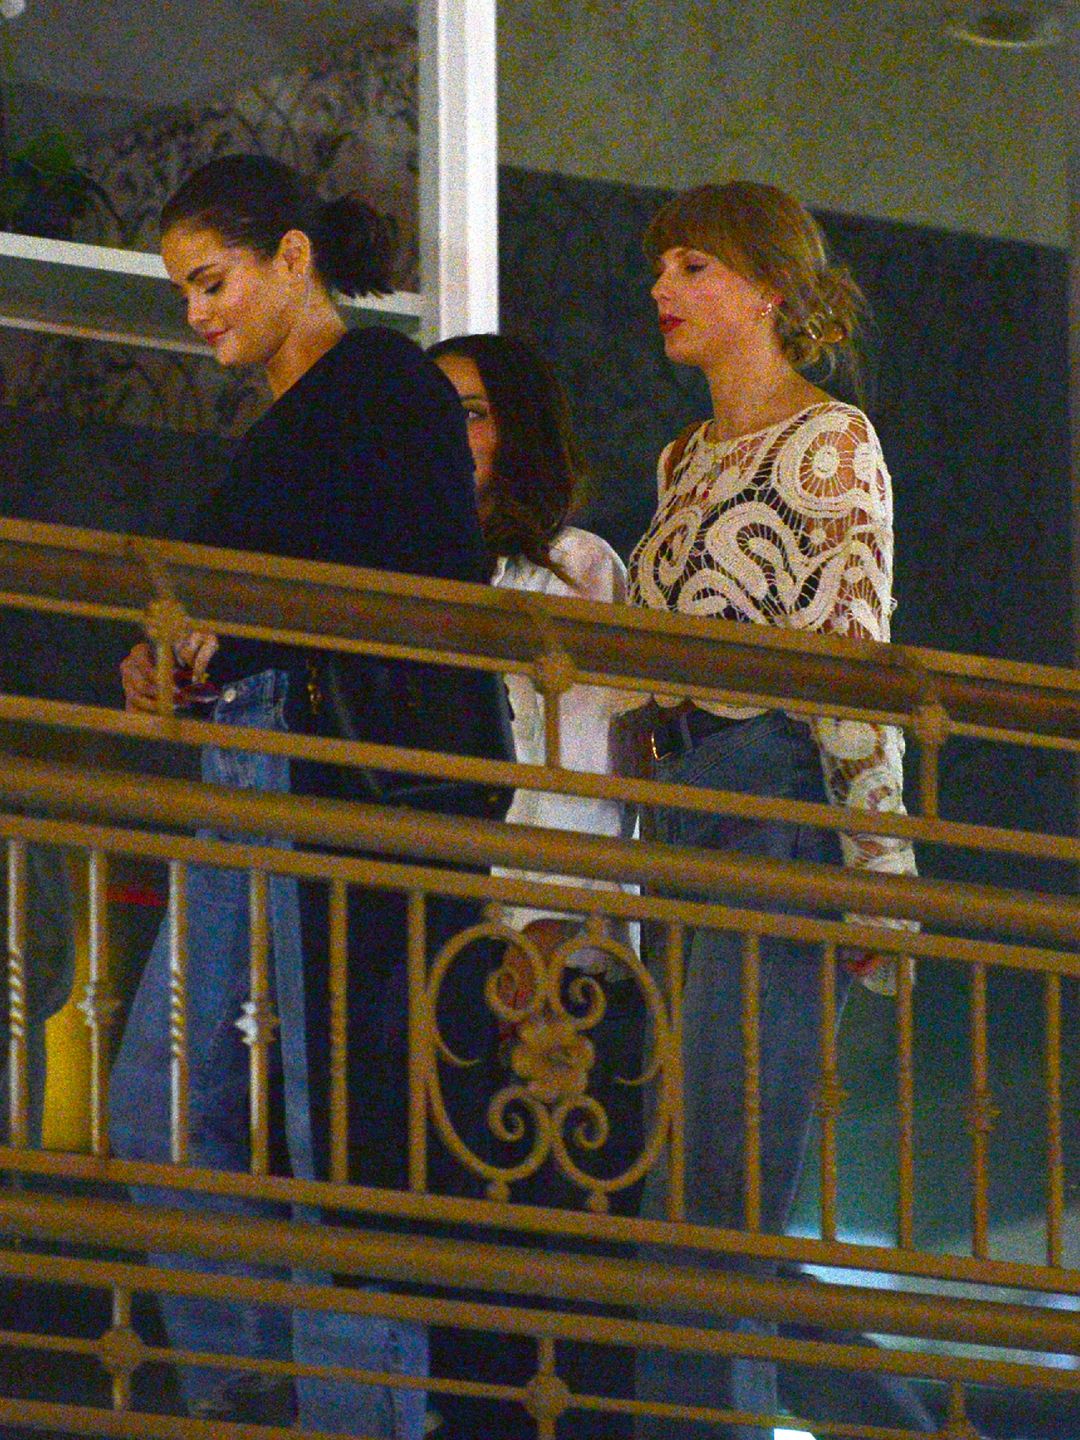 Taylor Swift and Selena Gomez were spotted at Sushi Park